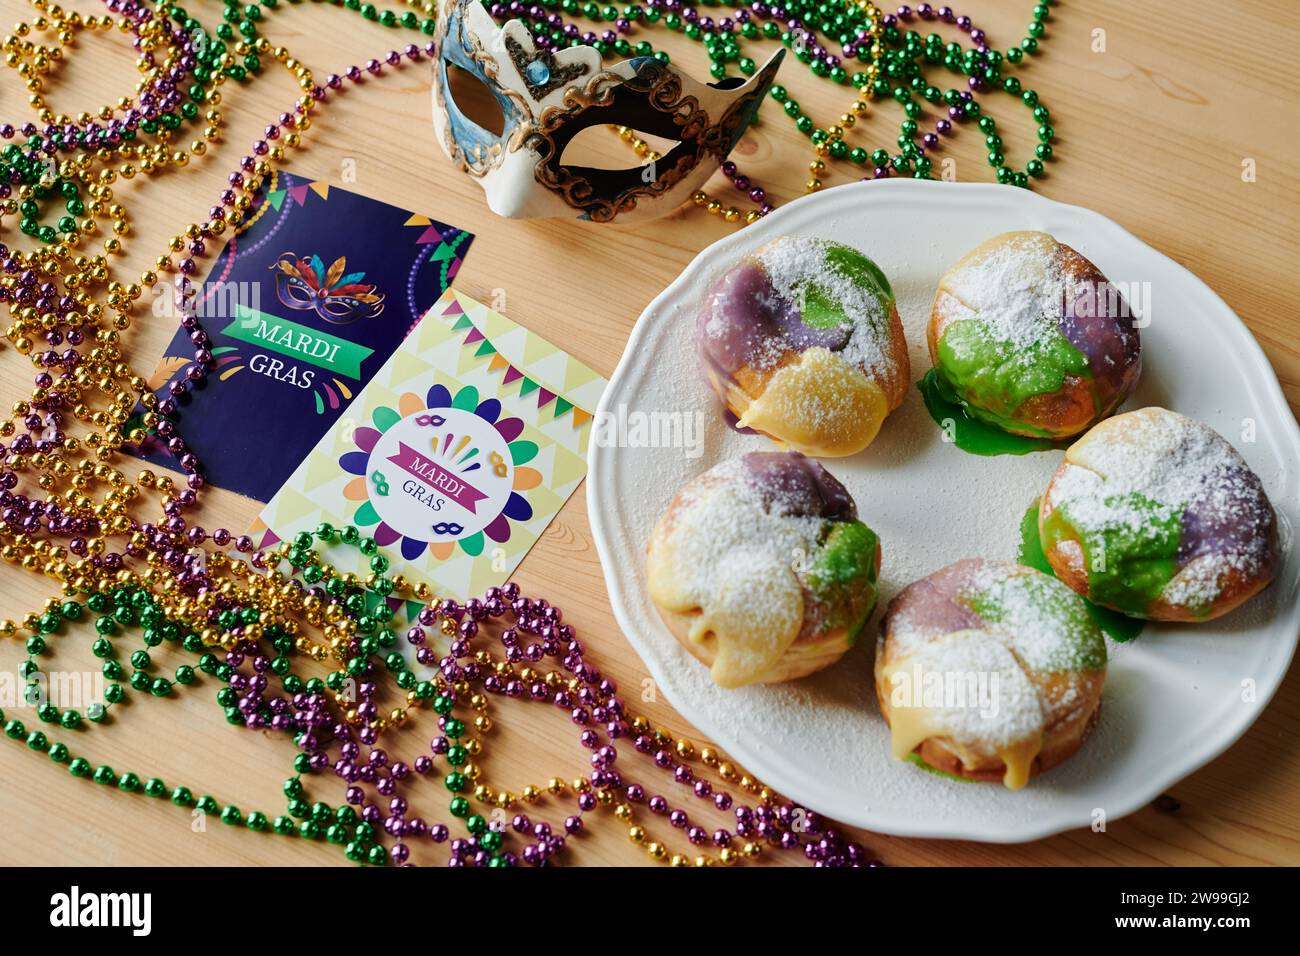 Plate with several homemade berliner donuts standing among other symbols of Mardi Gras such as postcards, venetian mask and beads Stock Photo